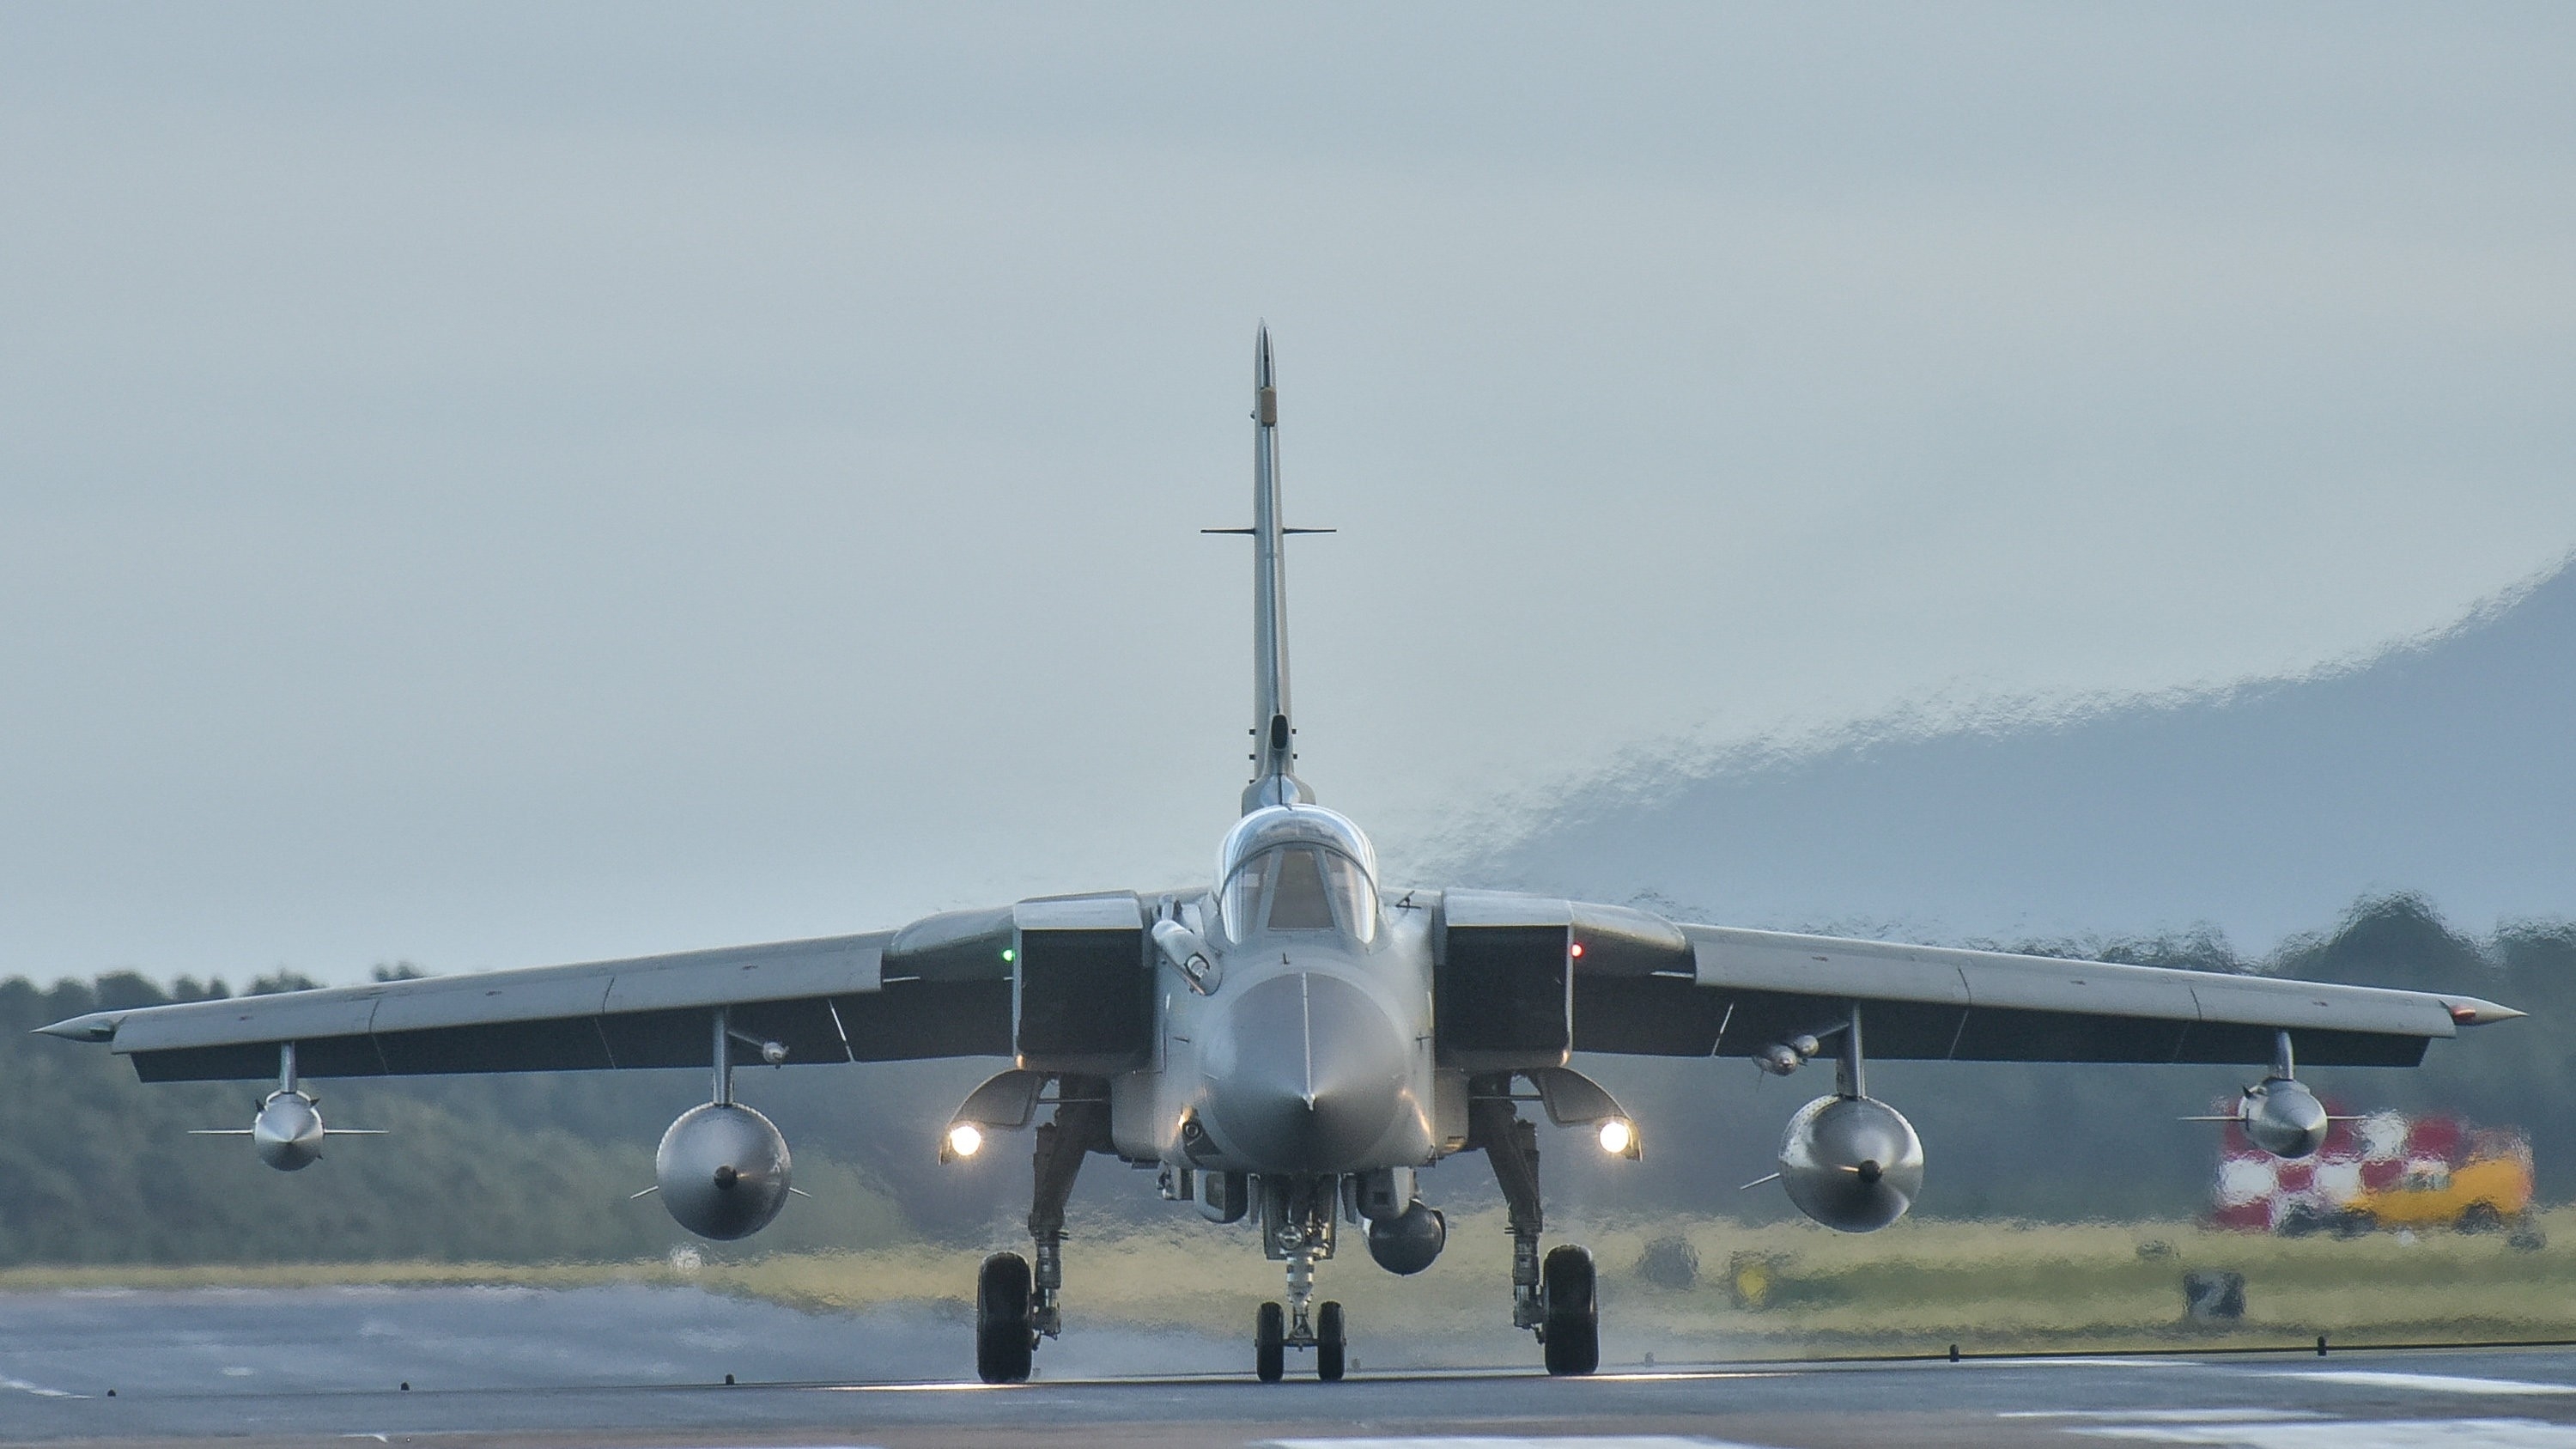 An RAF Tornado GR4 is pictured landing at RAF Lossiemouth